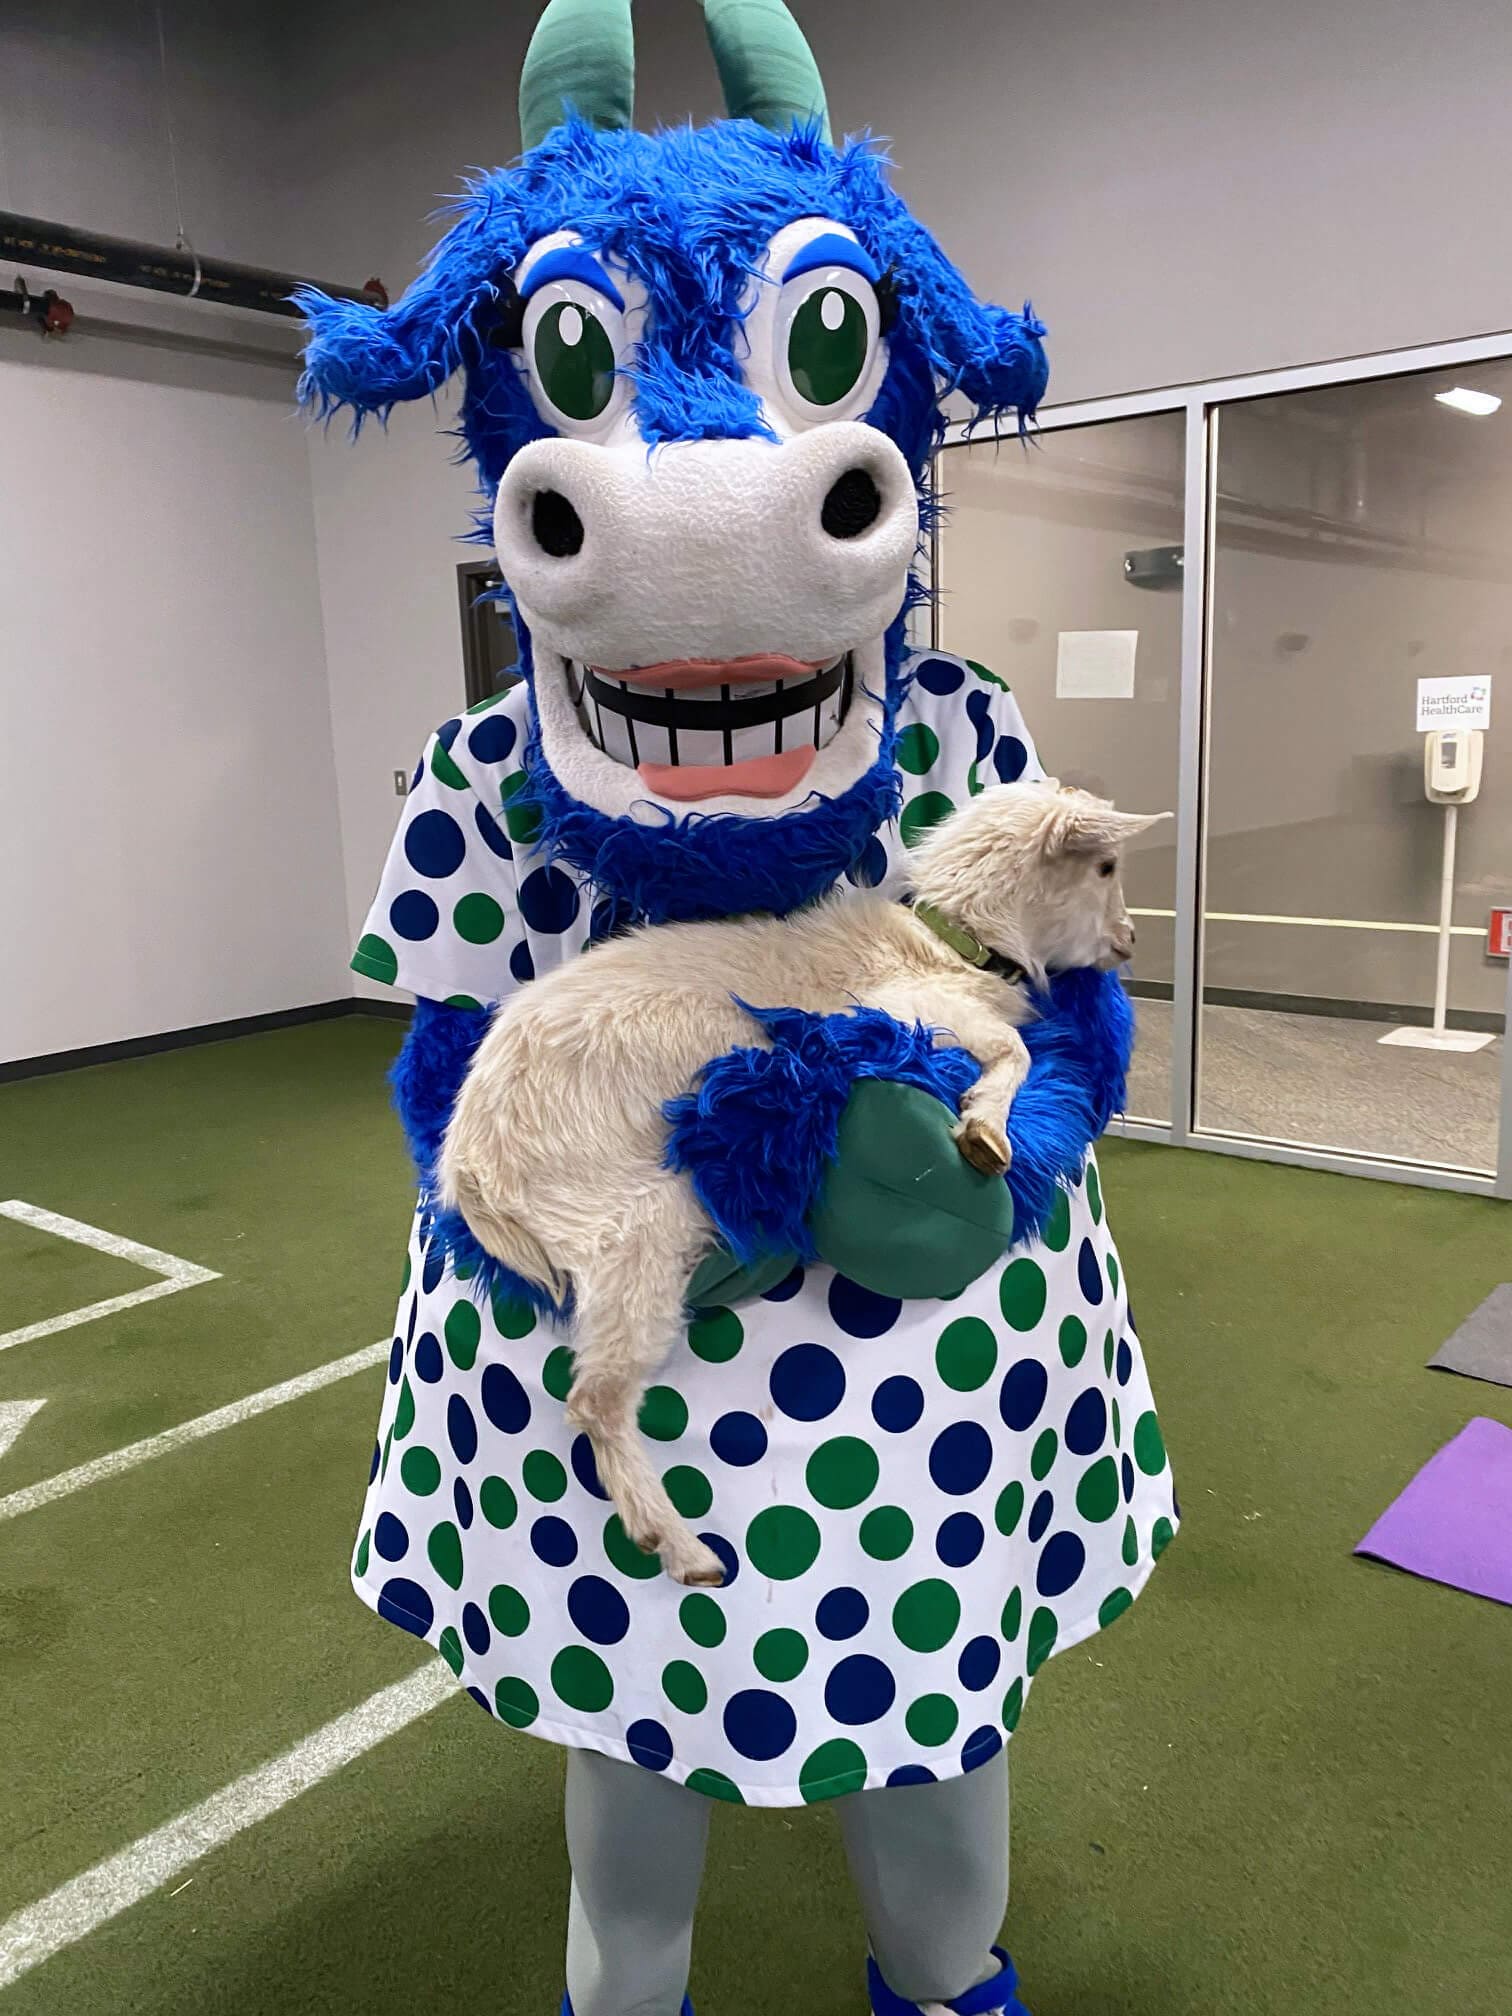 Hartford Yard Goats Unveil Mascots Chompers and Chew Chew